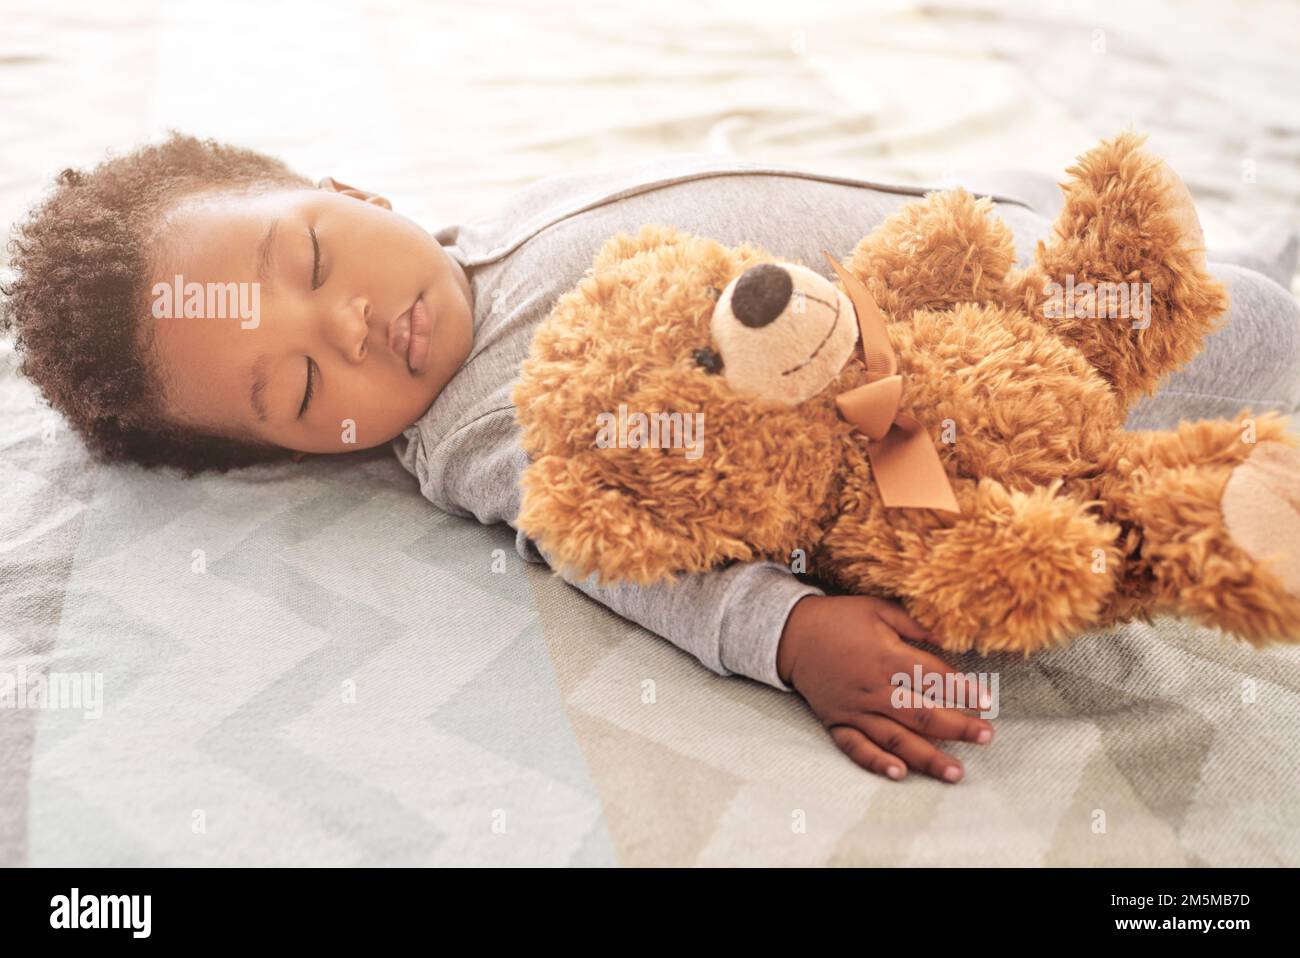 With teddy close by he has the softest sweetest dreams. a little baby boy sleeping on a bed with a teddy bear. Stock Photo